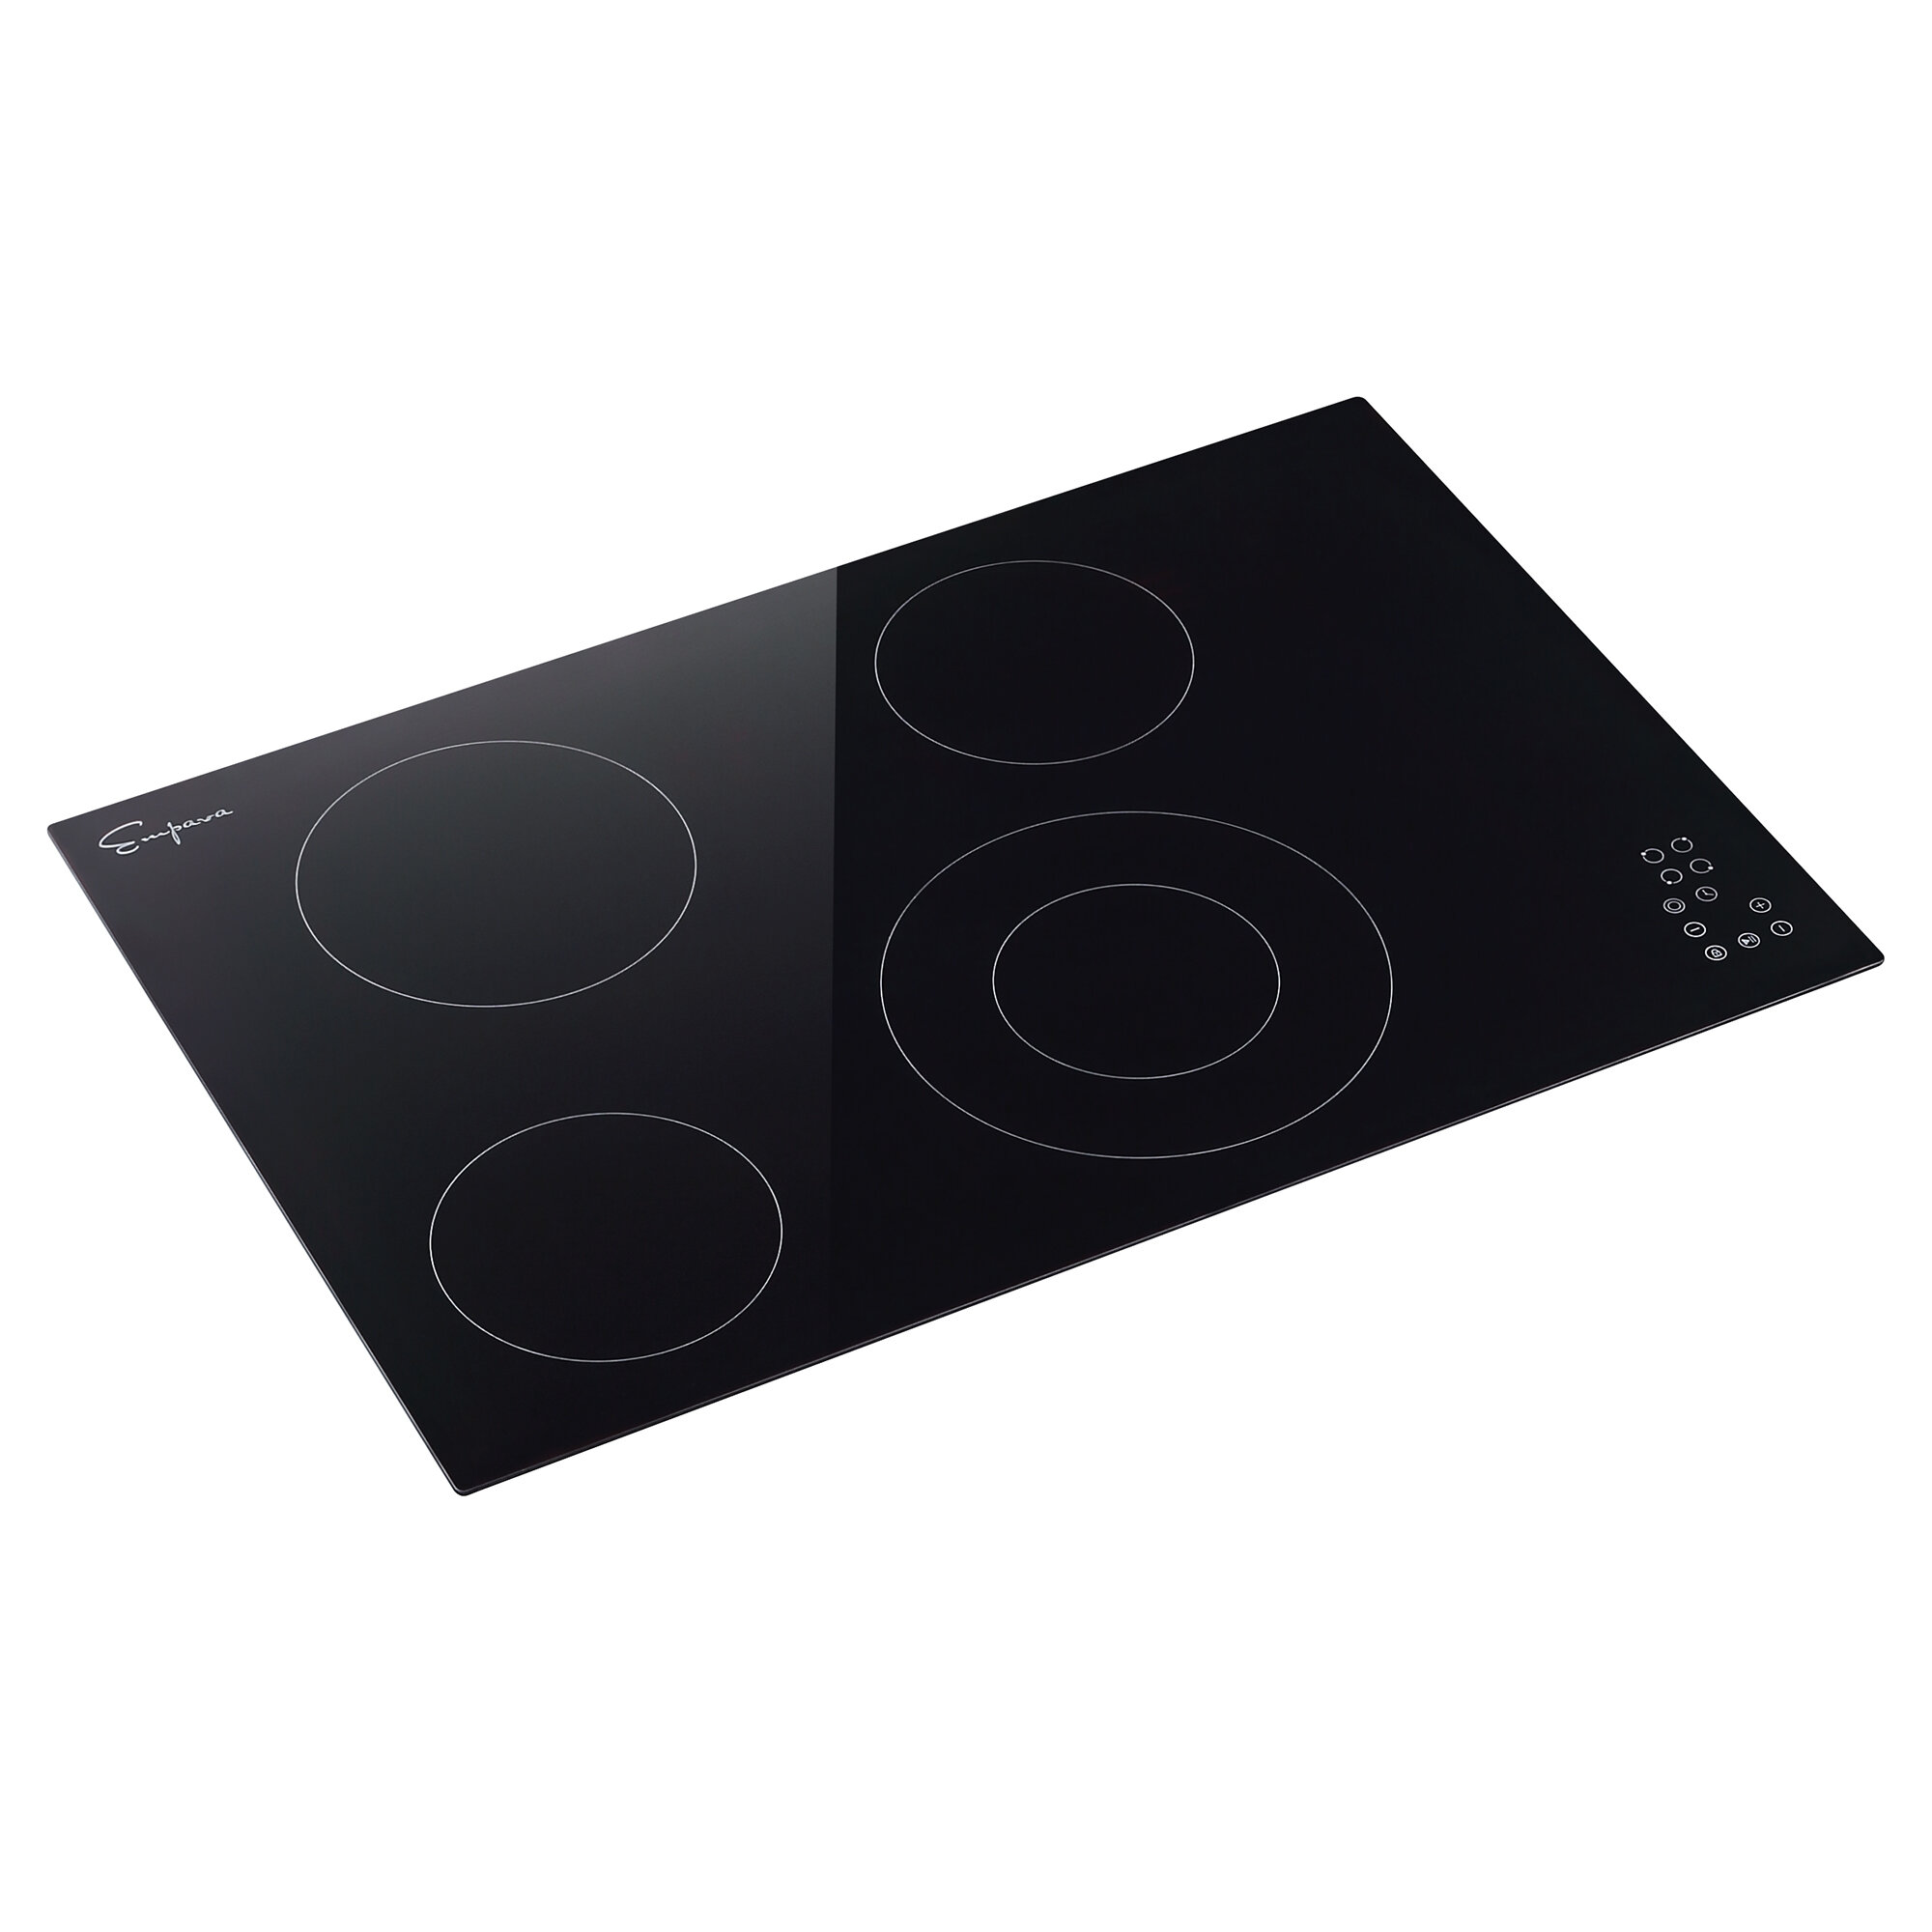 Empava 240V Flat Top Electric Stove 30-in 5 Elements Smooth Surface (Radiant) Black Electric Cooktop Stainless Steel | EPV-30REC13